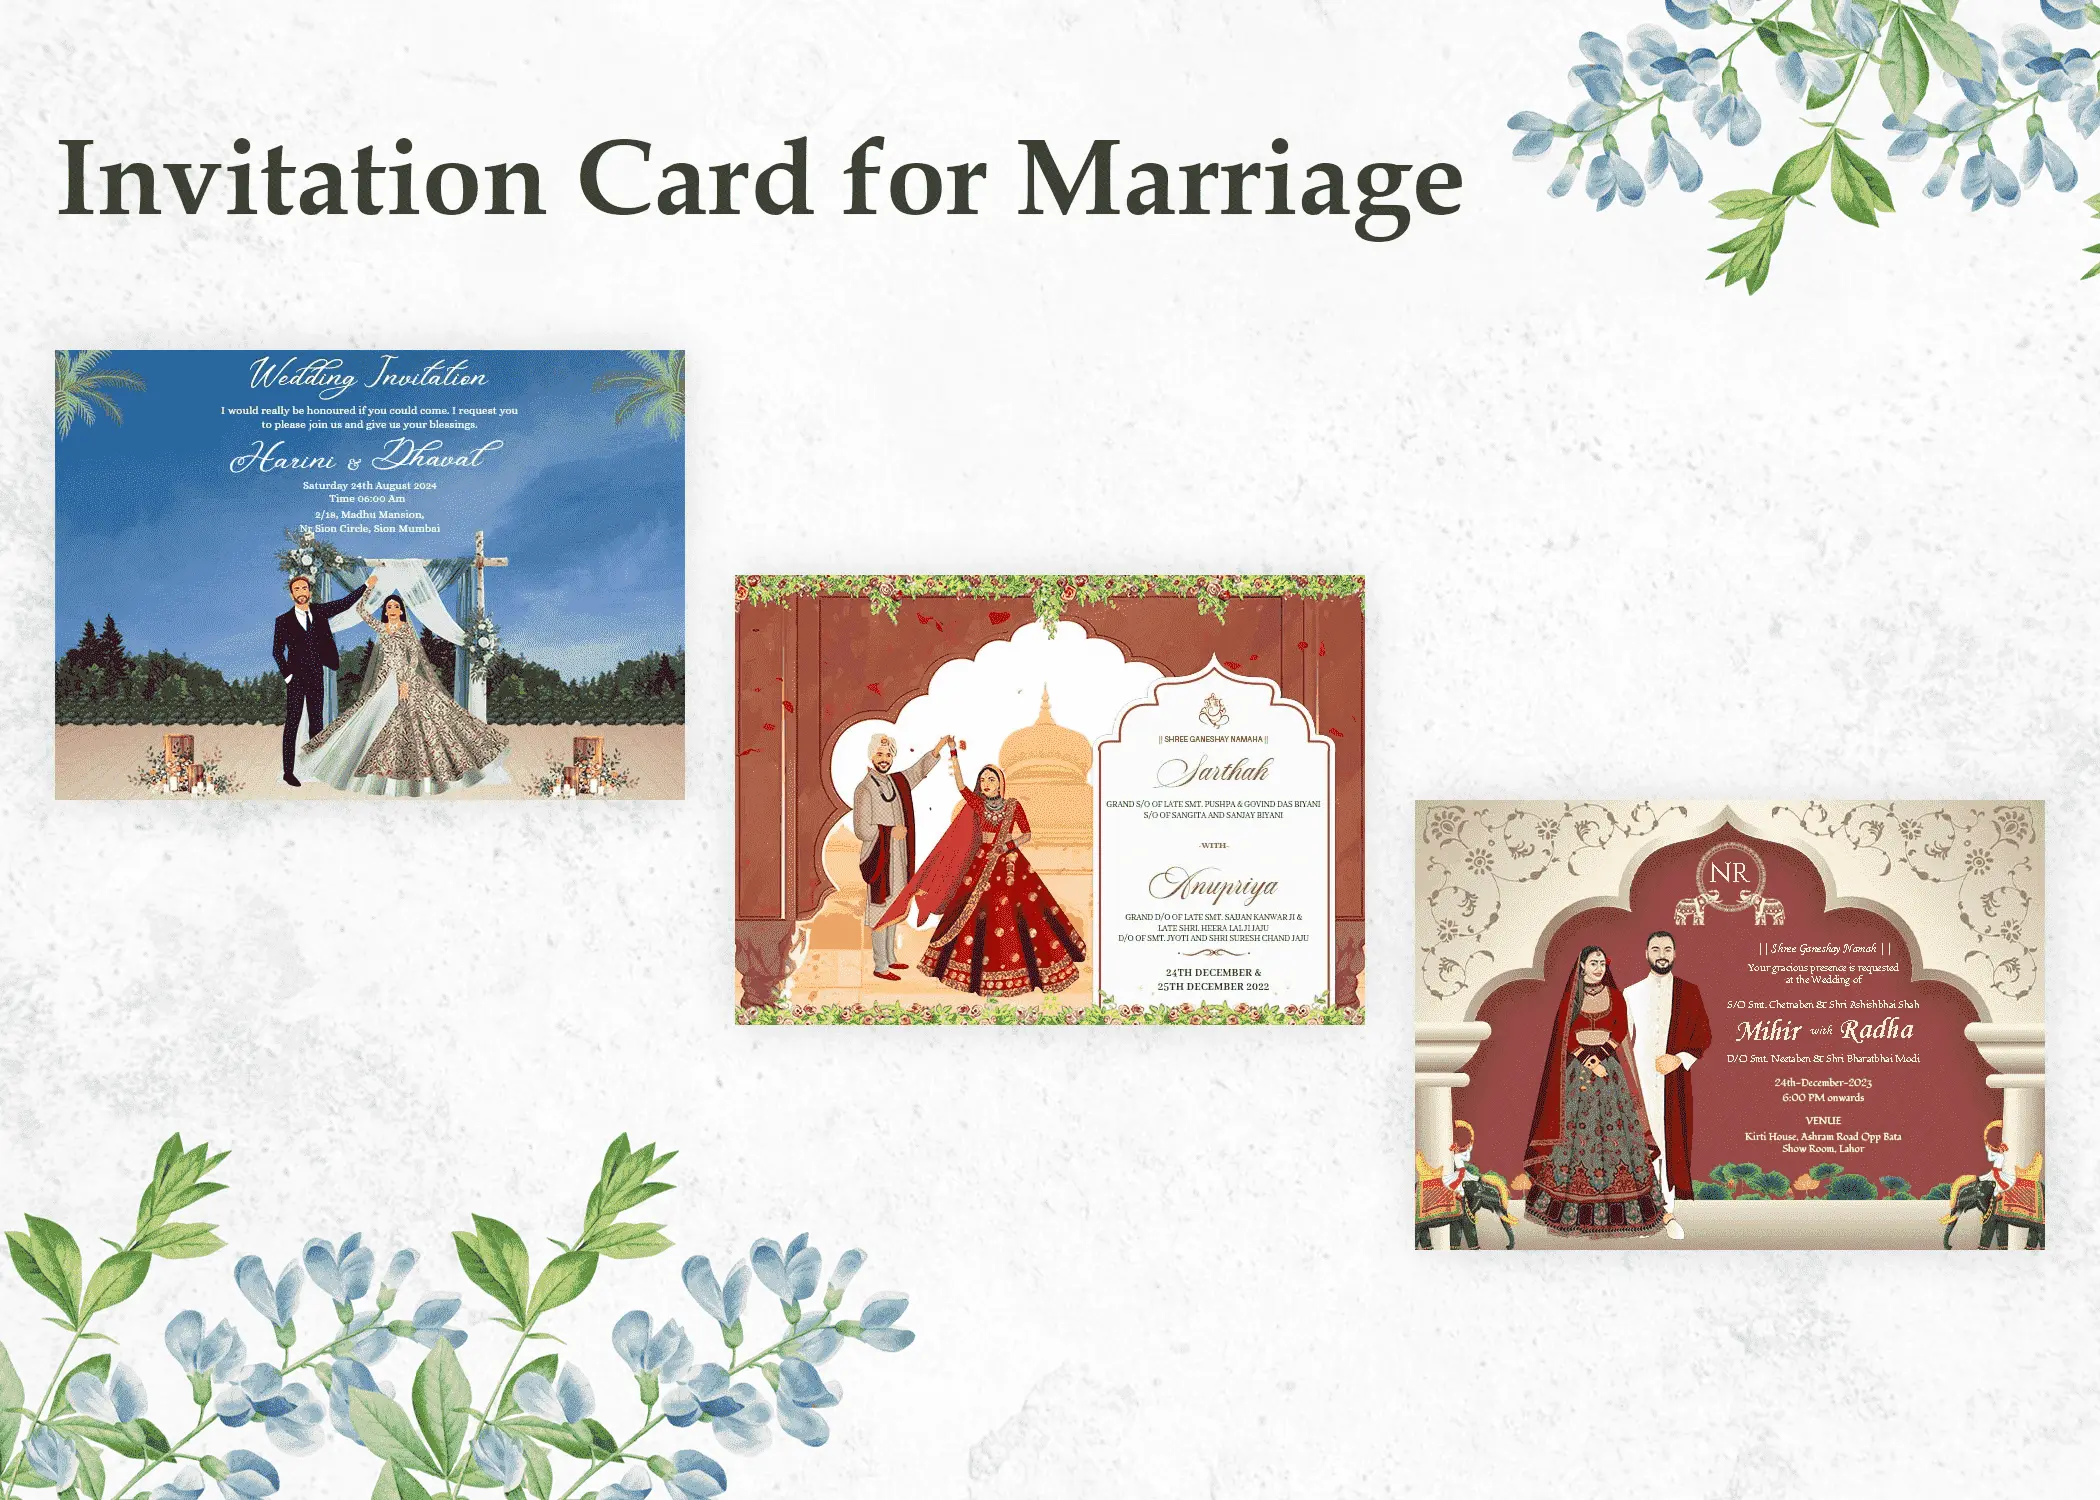 Invitation Card for Marriage: Crafting Timeless and Personalized Mementos